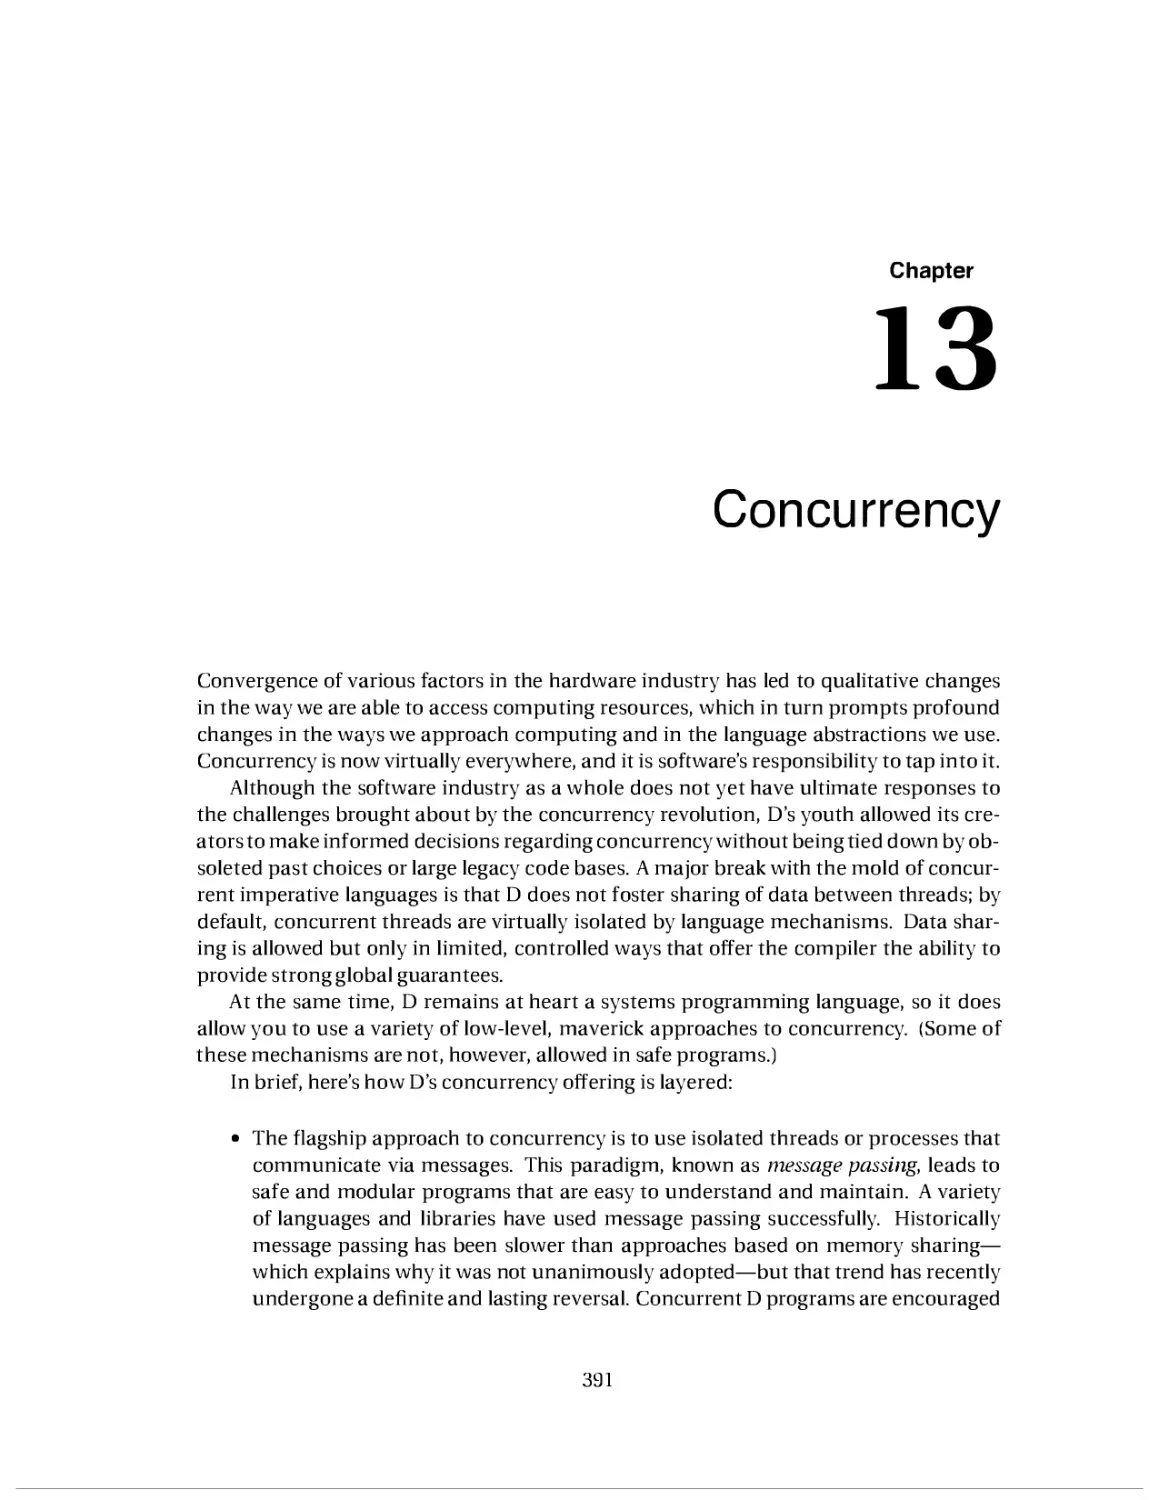 13. Concurrency